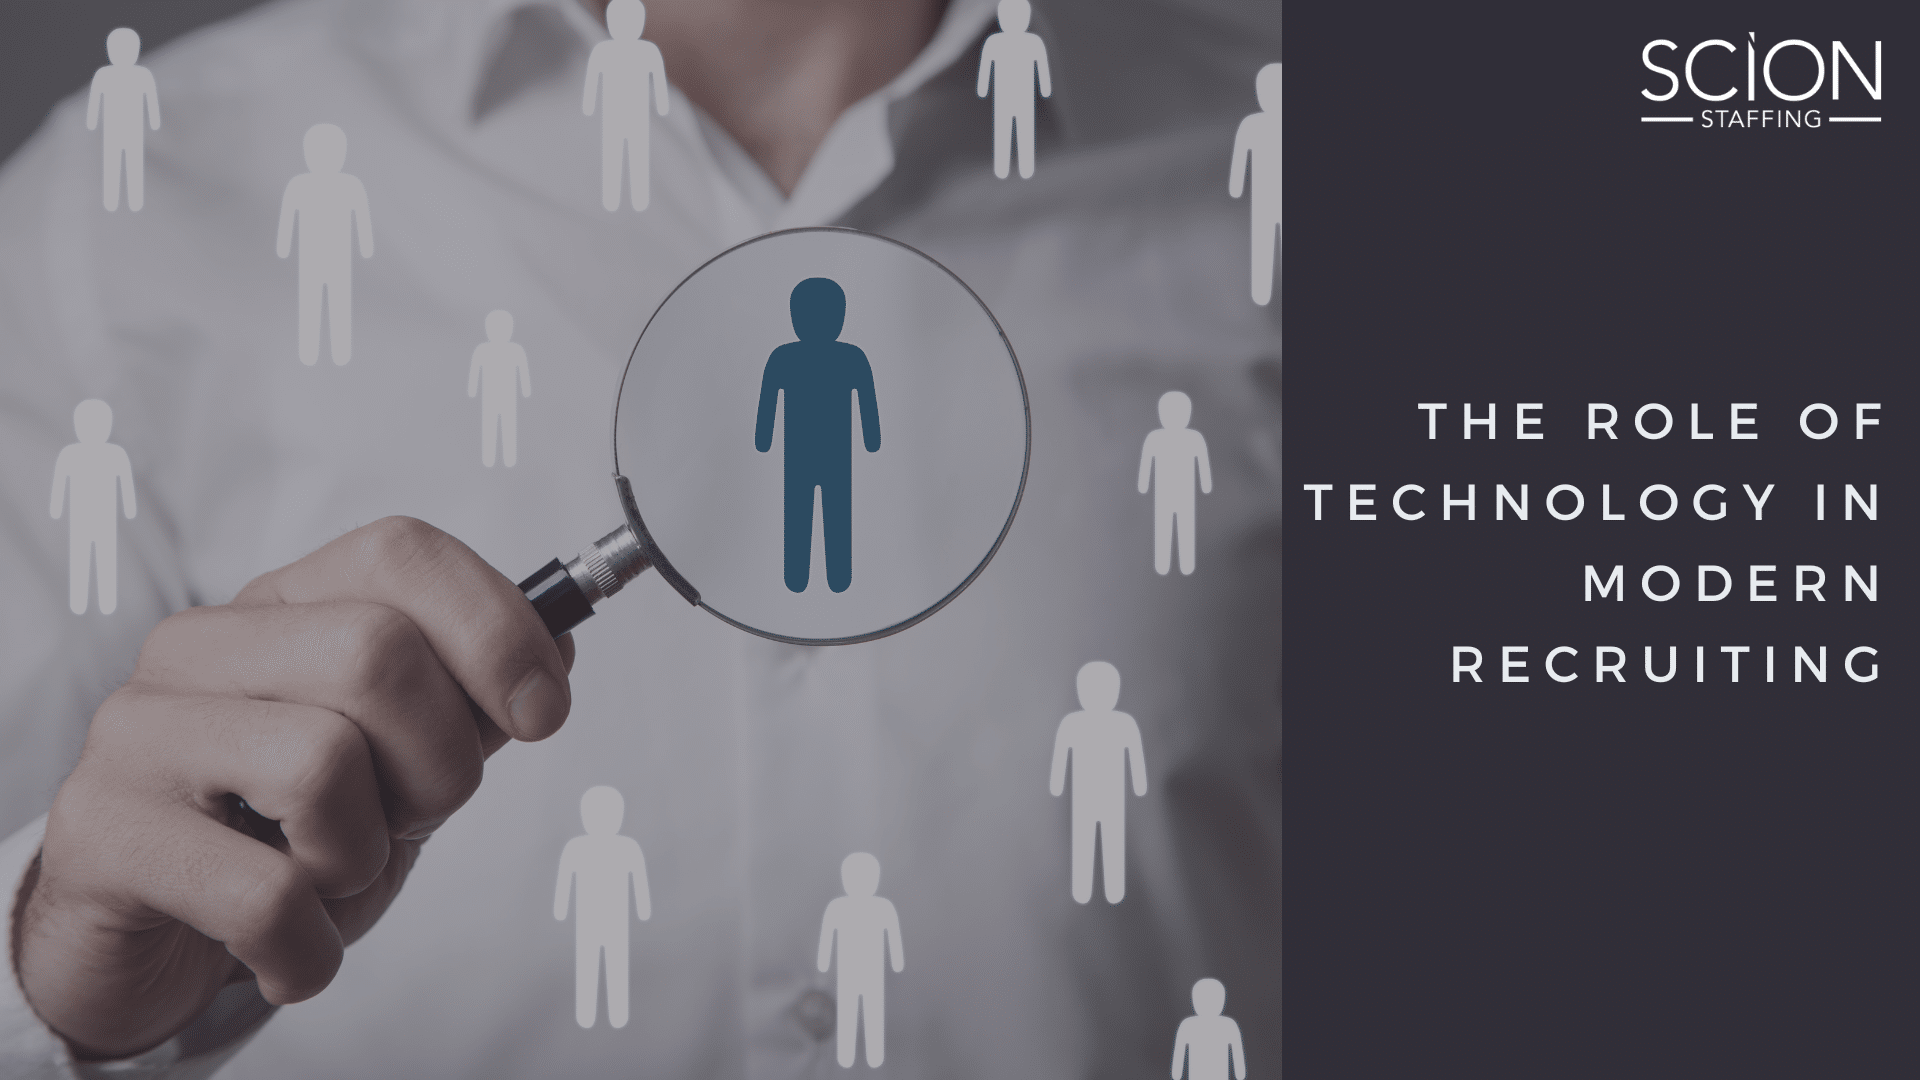 The Role of Technology in Modern Recruiting